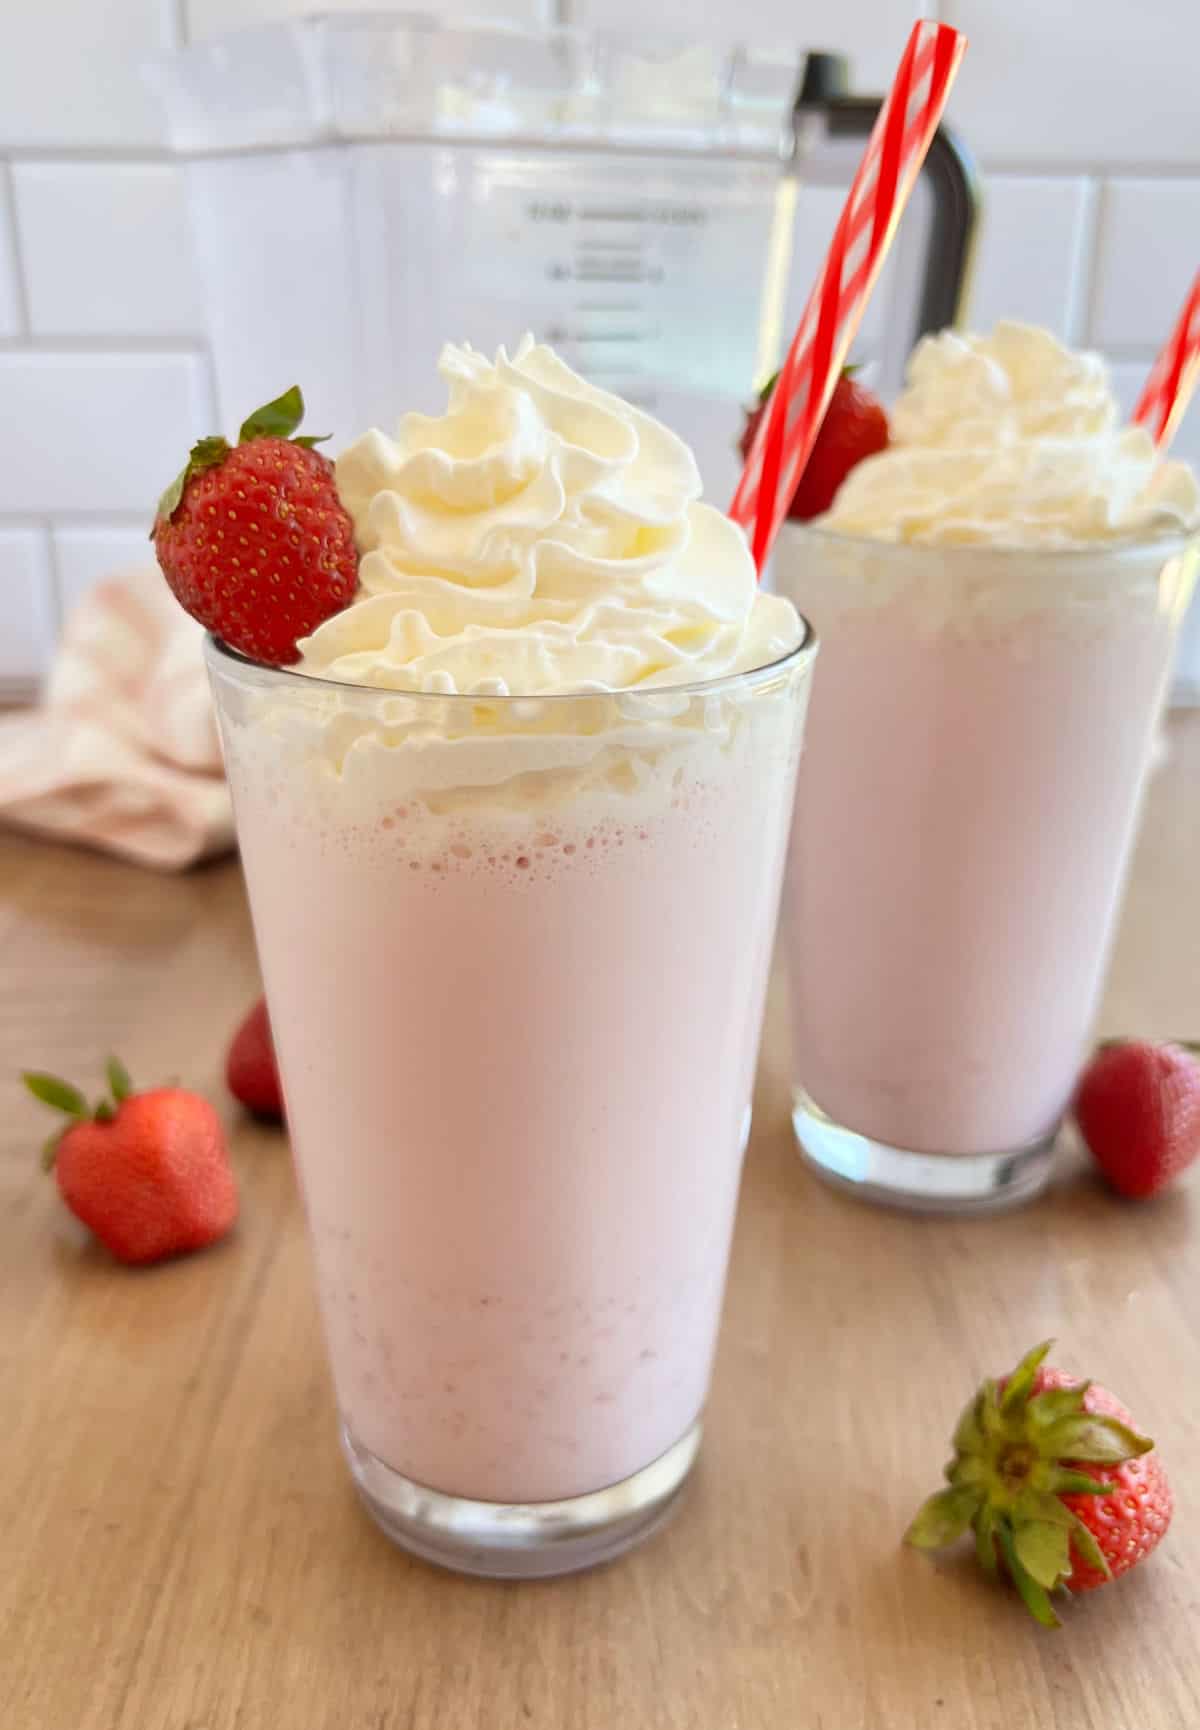 strawberry milkshakes with whipped cream and strawberries in tall glass.